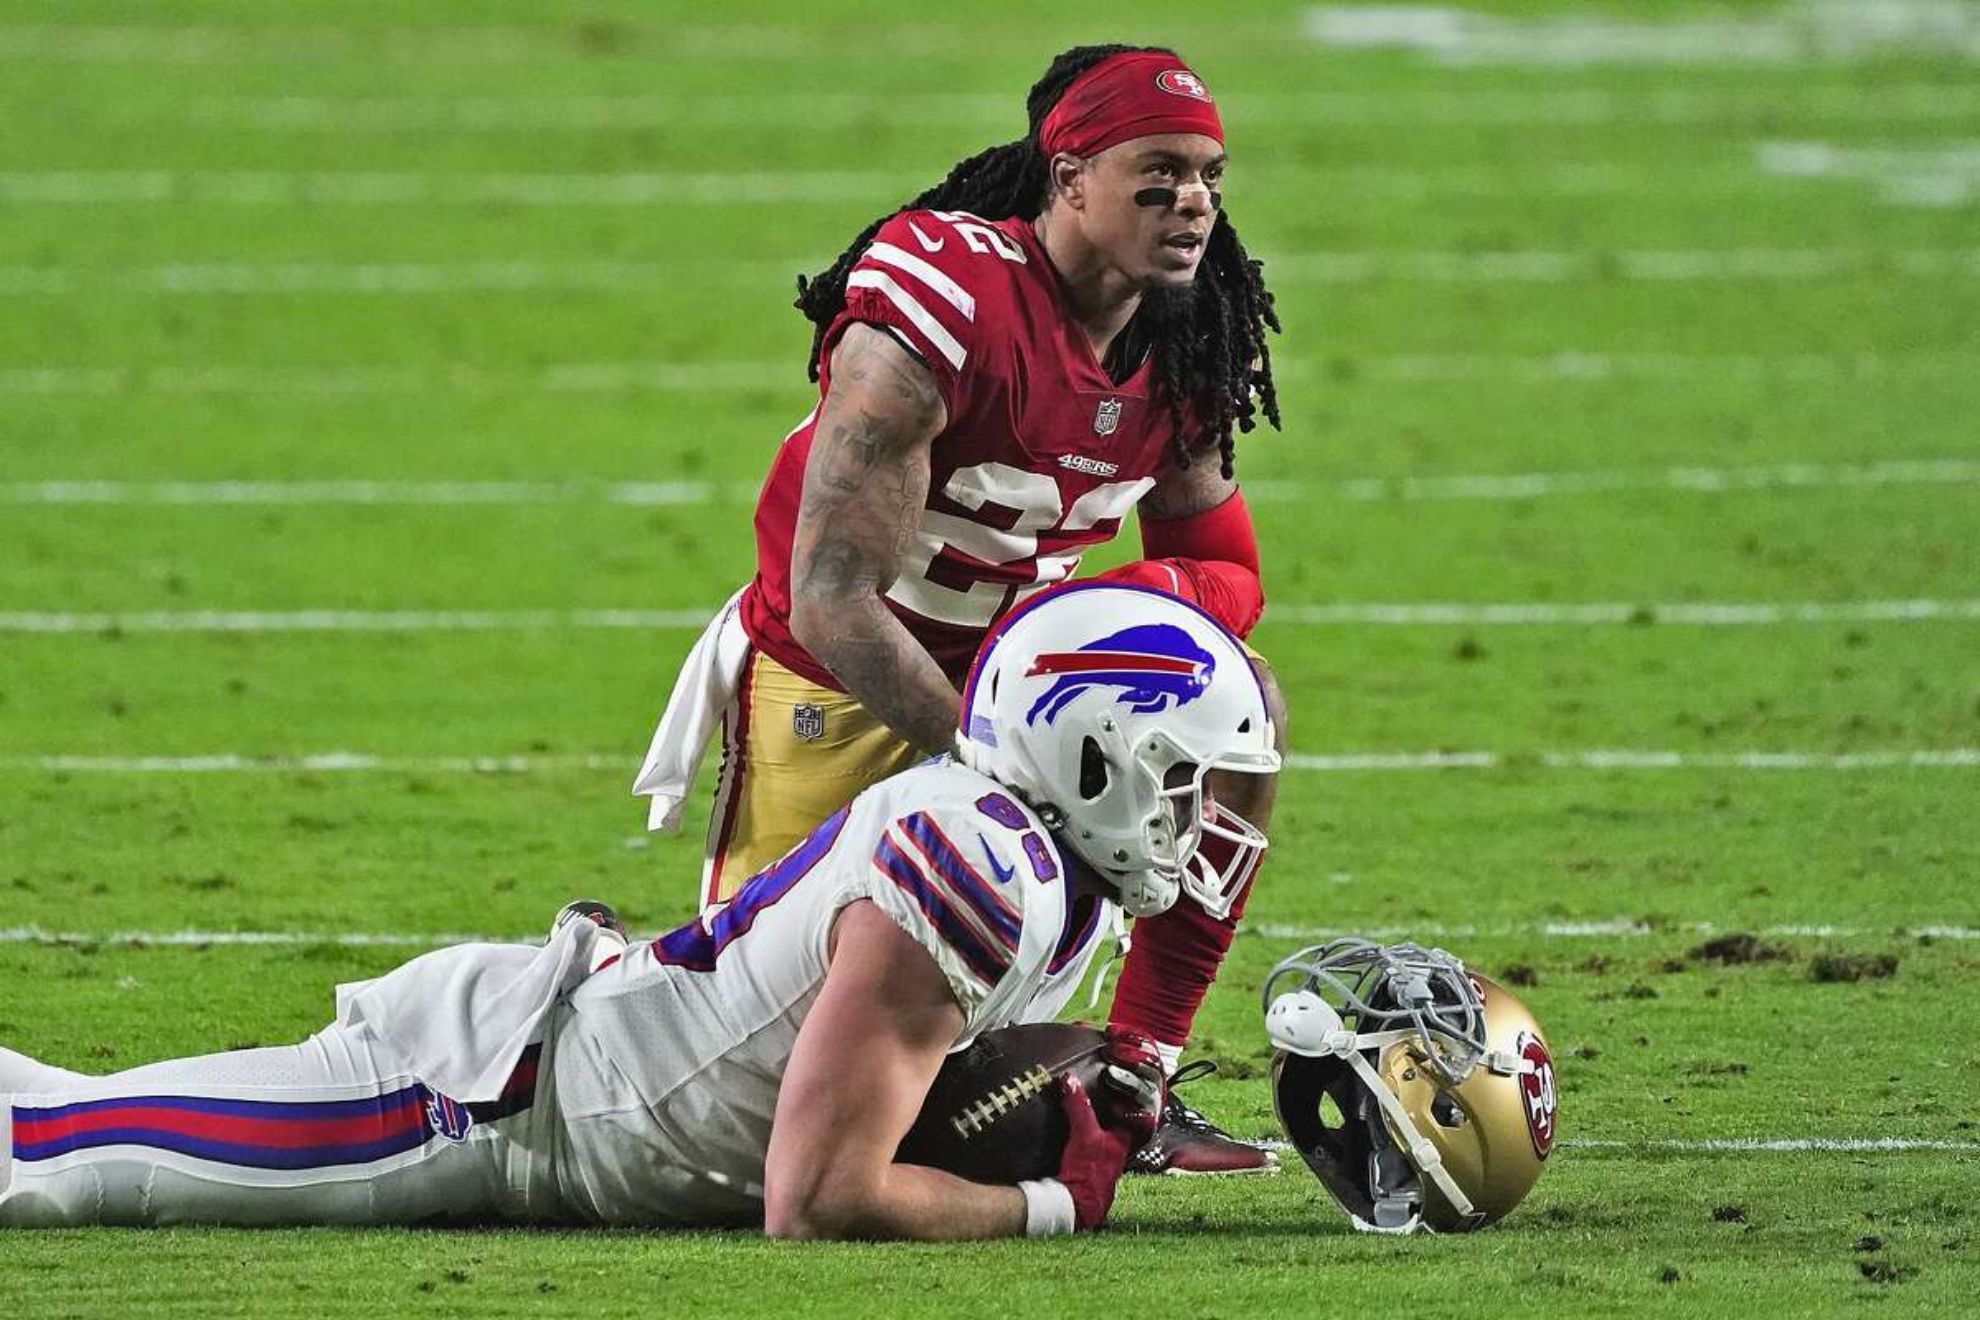 Verrett's attempted return from a knee injury was derailed when he tore his Achilles in practice, announced by the team on Thursday, Nov. 10, 2022, in the latest setback in career full of significant injuries.